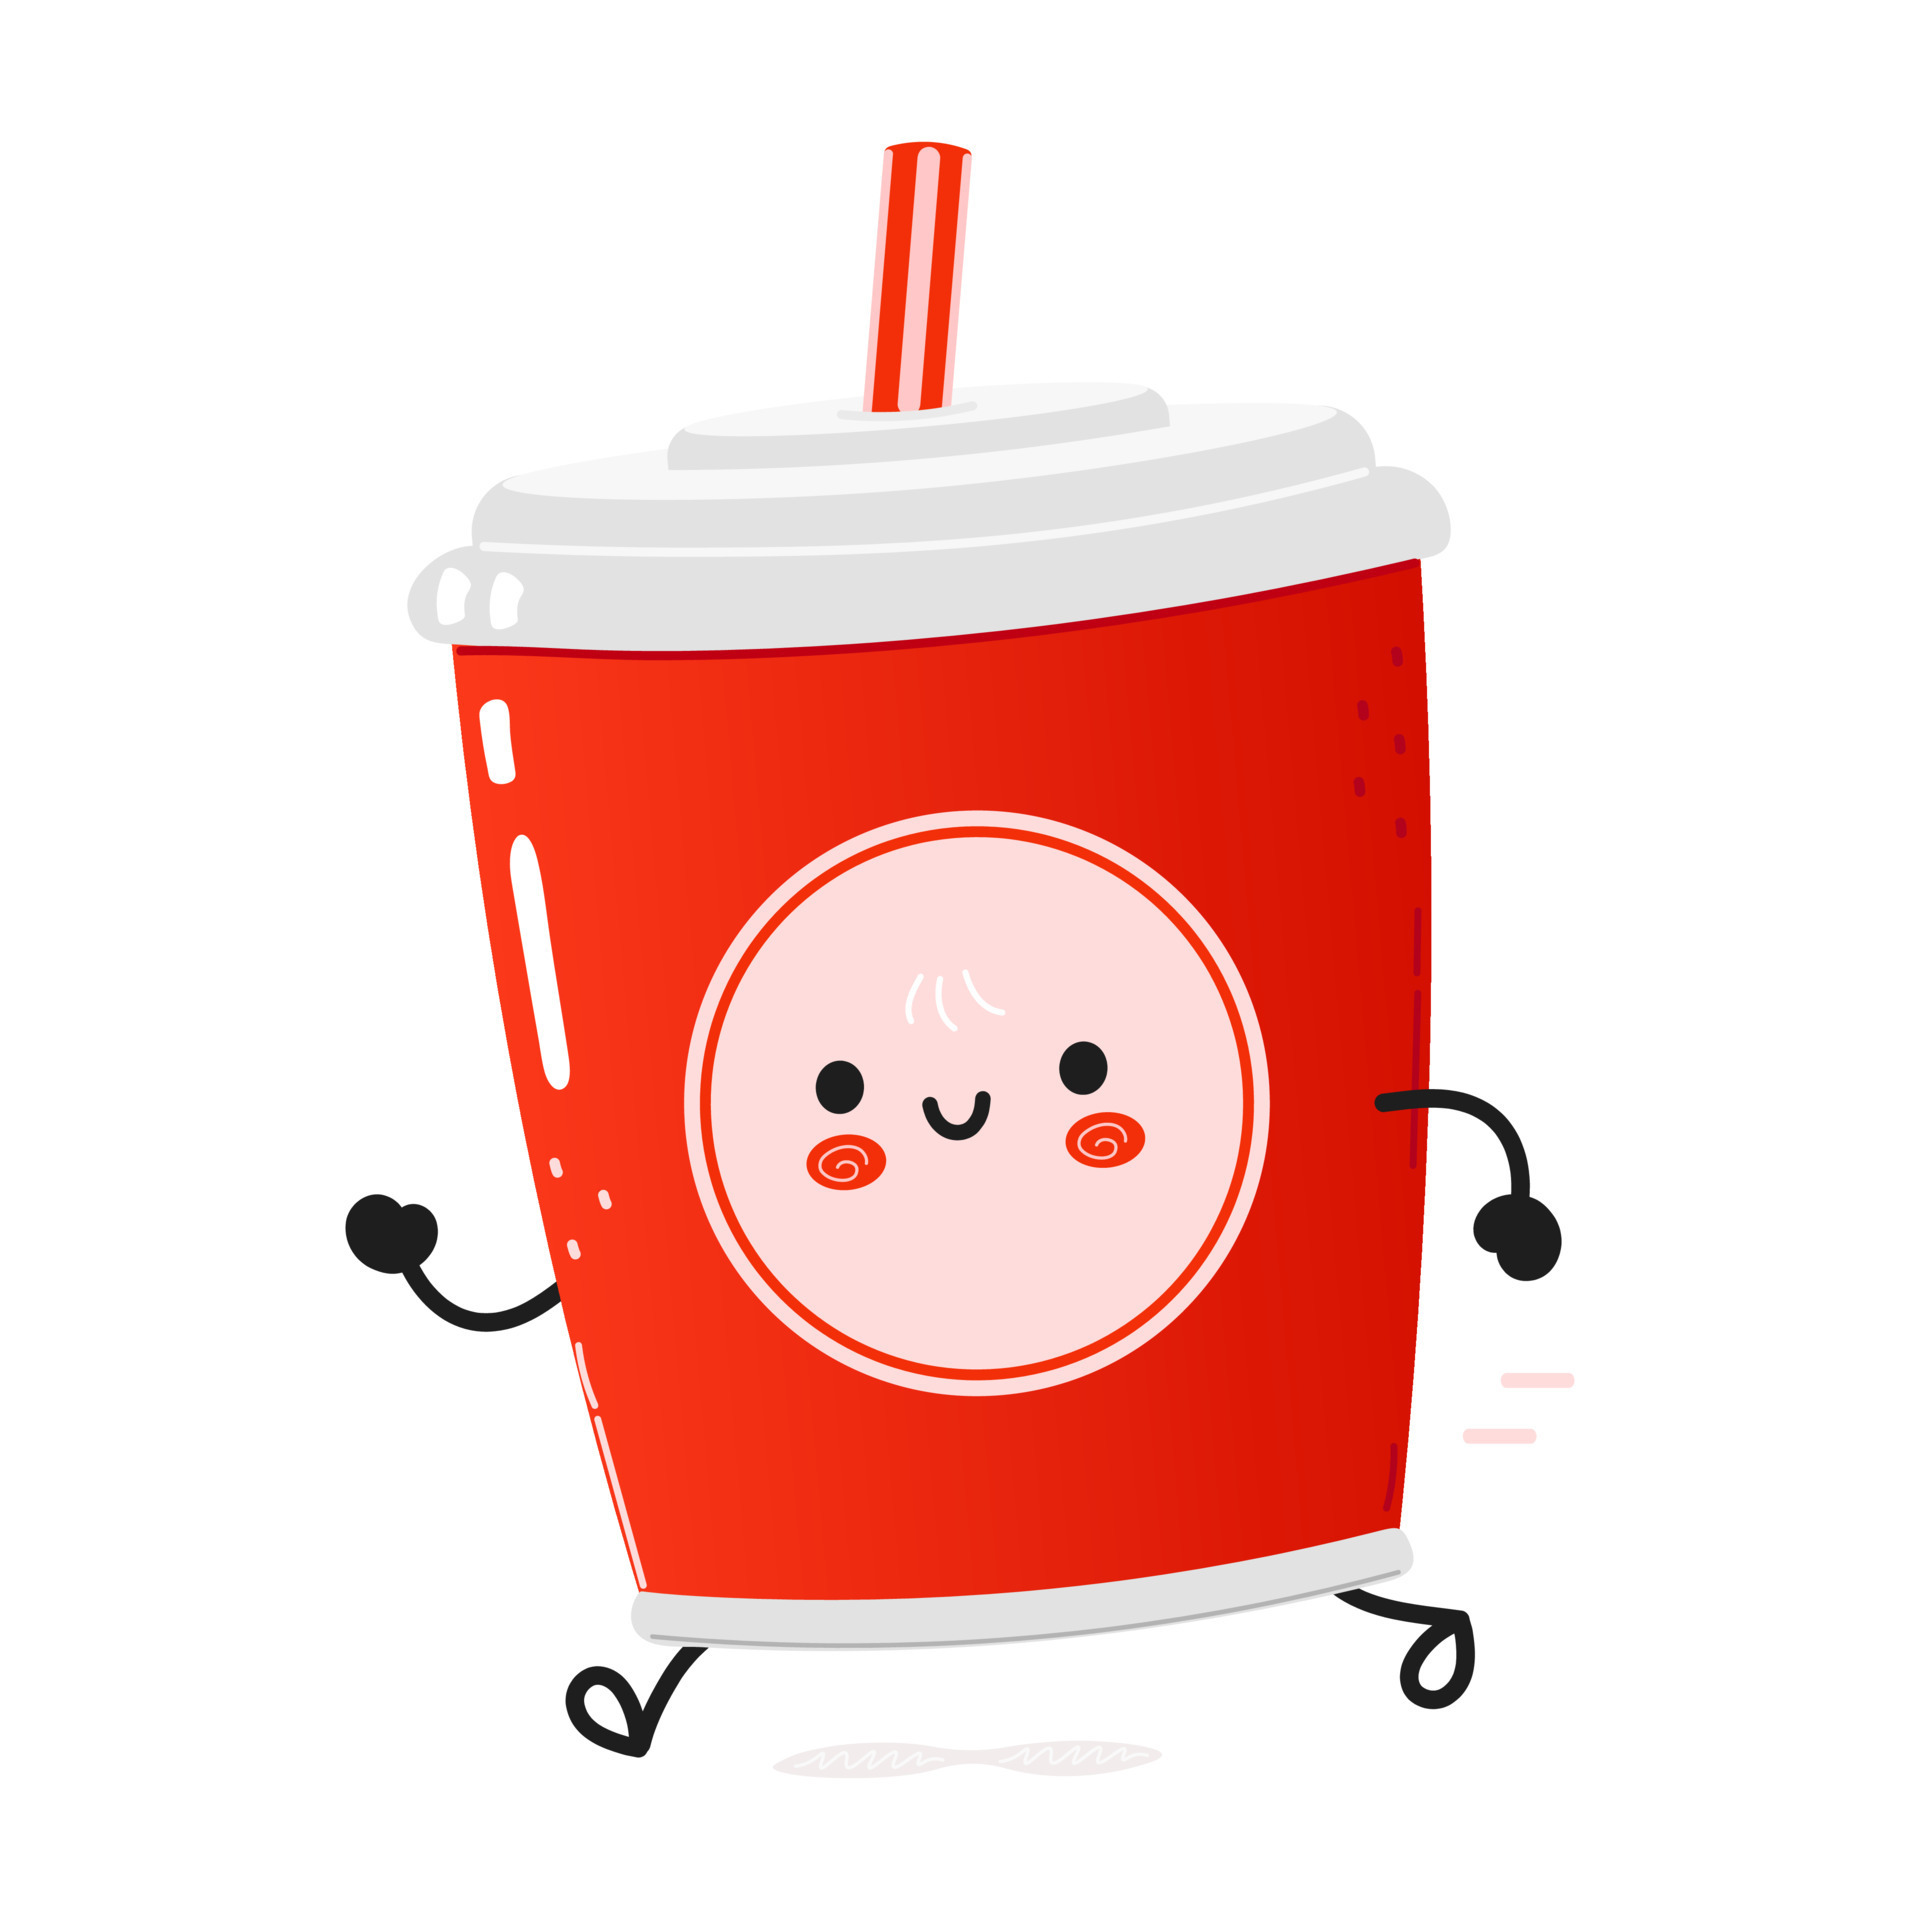 https://static.vecteezy.com/system/resources/previews/007/746/812/original/cute-funny-running-red-plastic-cup-cold-drink-cola-and-straw-hand-drawn-cartoon-kawaii-character-illustration-icon-isolated-background-run-red-plastic-cup-cold-drink-cola-and-straw-concept-vector.jpg